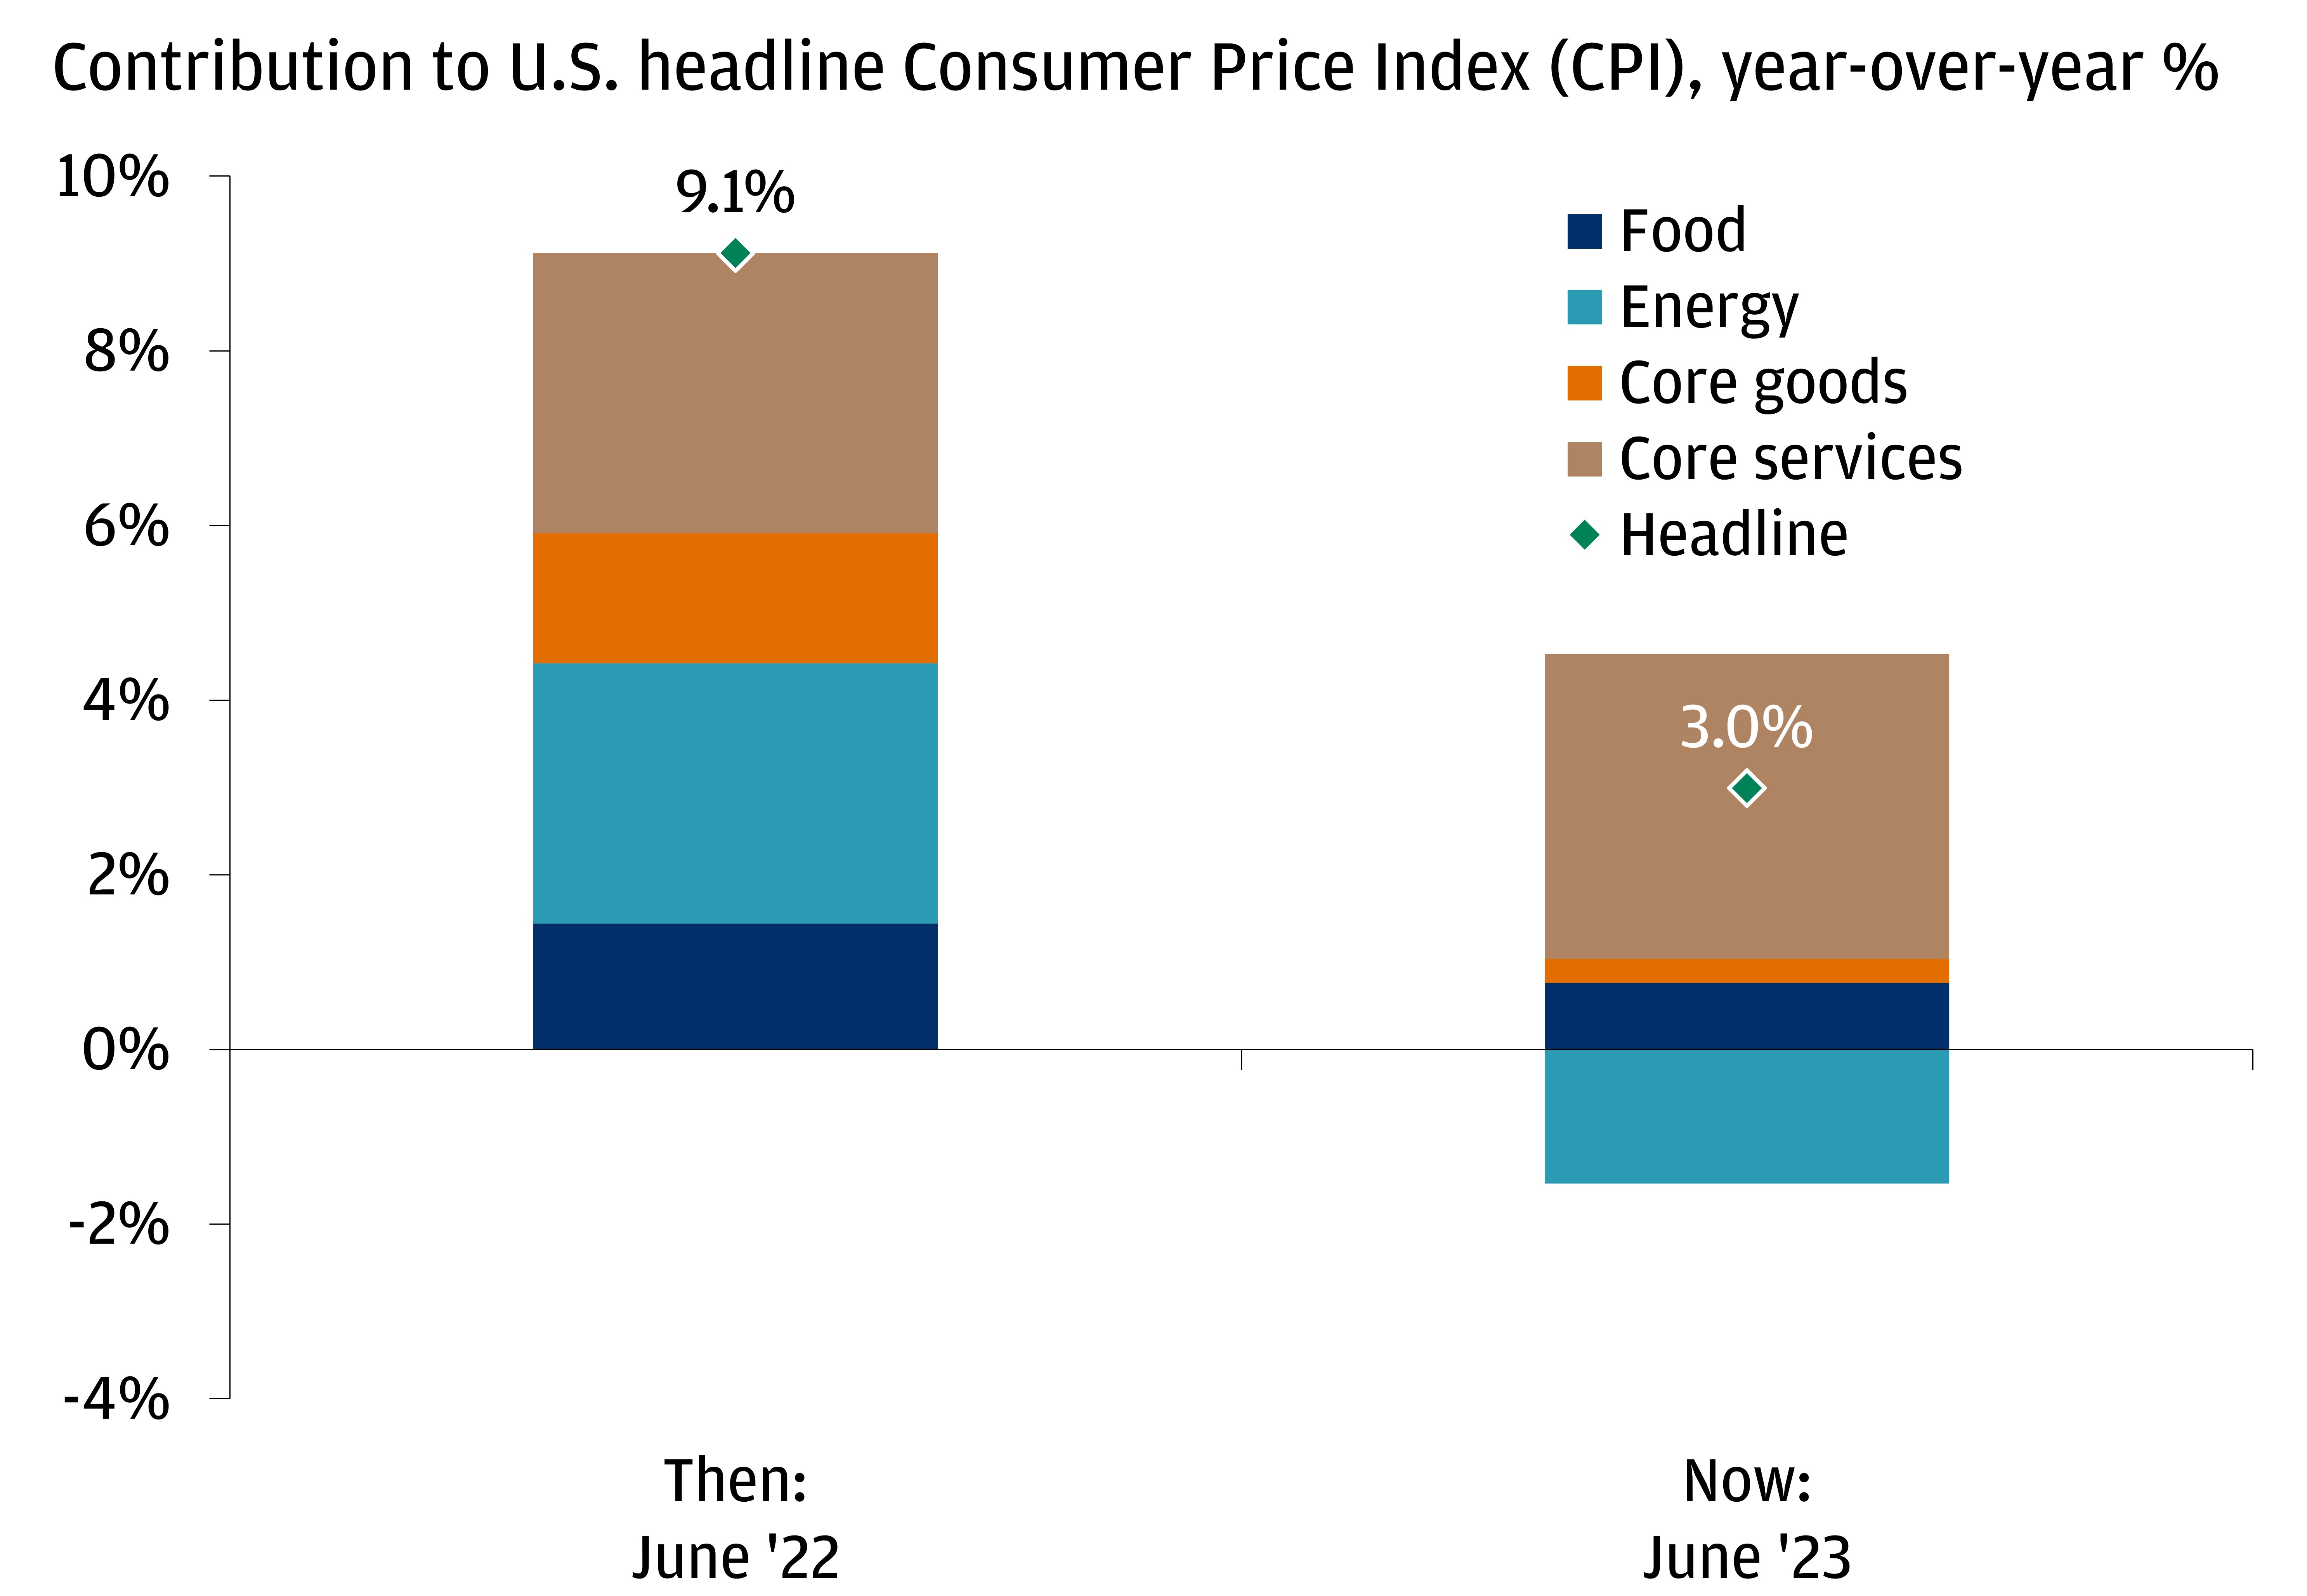 This chart shows the contribution to year-over-year U.S. headline Consumer Price Index (CPI) in June 2022 and June 2023